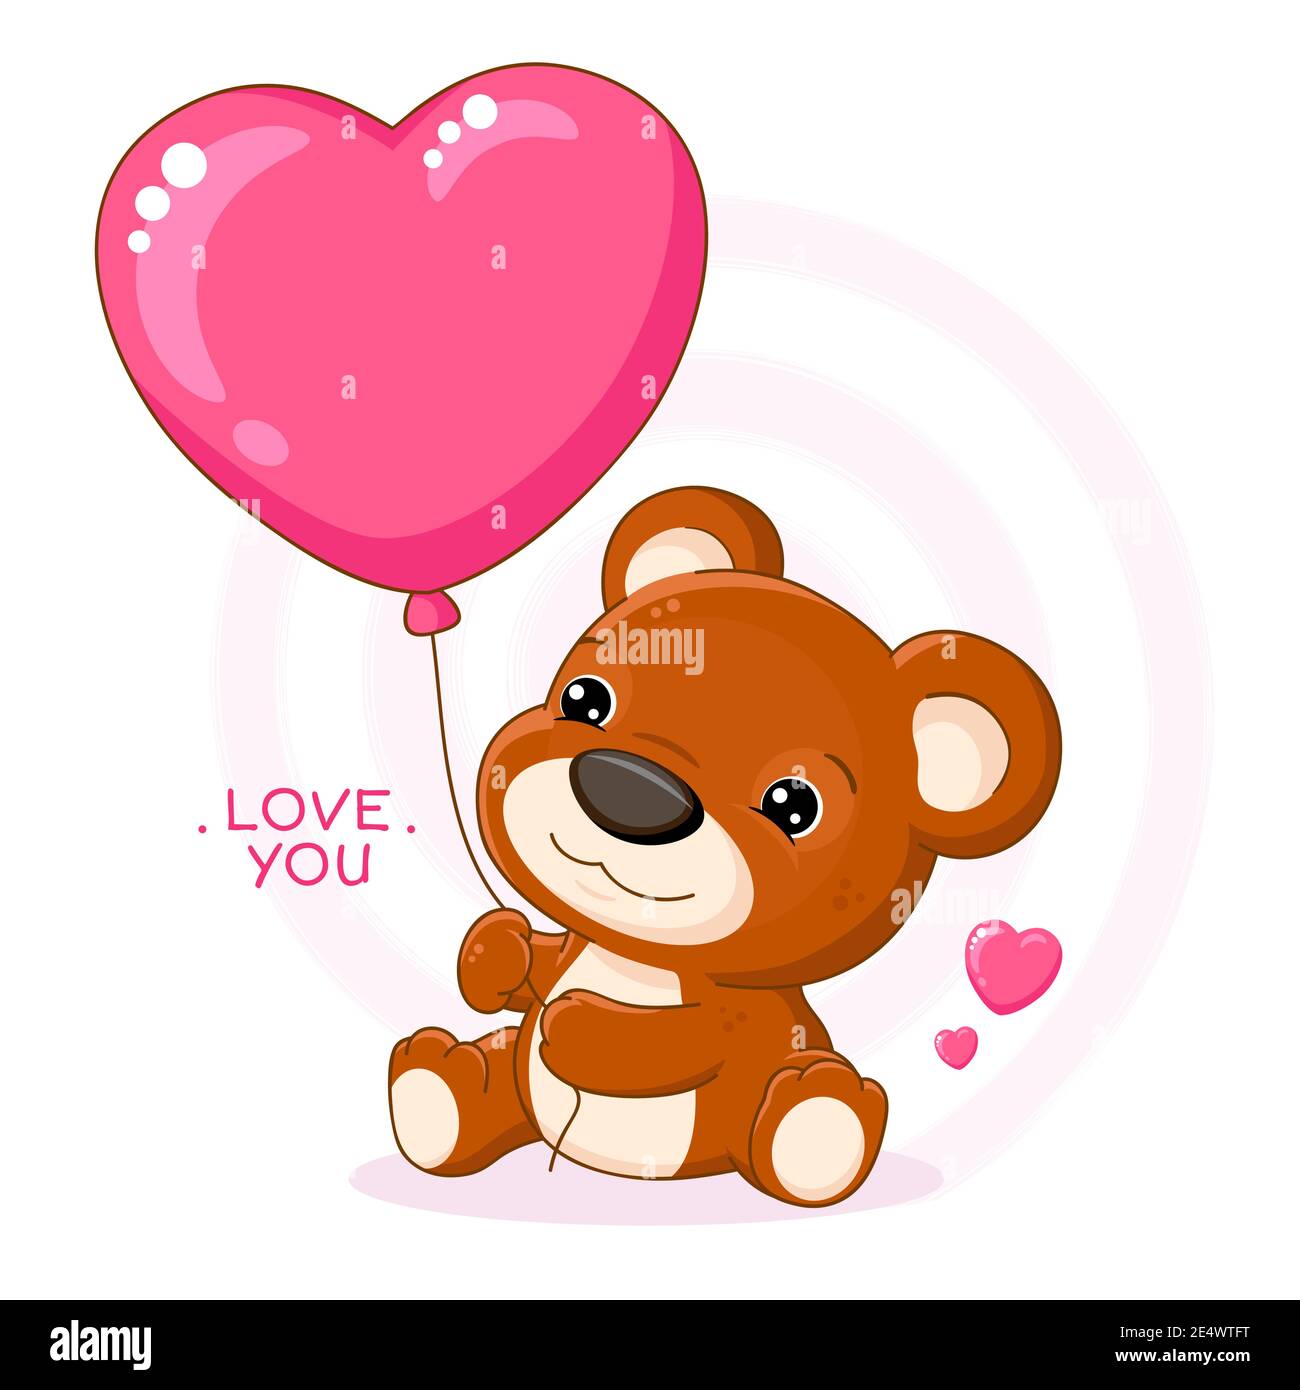 Valentine's day card in kawaii style. Cute little bear with heart shaped balloon, inscription Love you. Vector illustration EPS8 Stock Vector